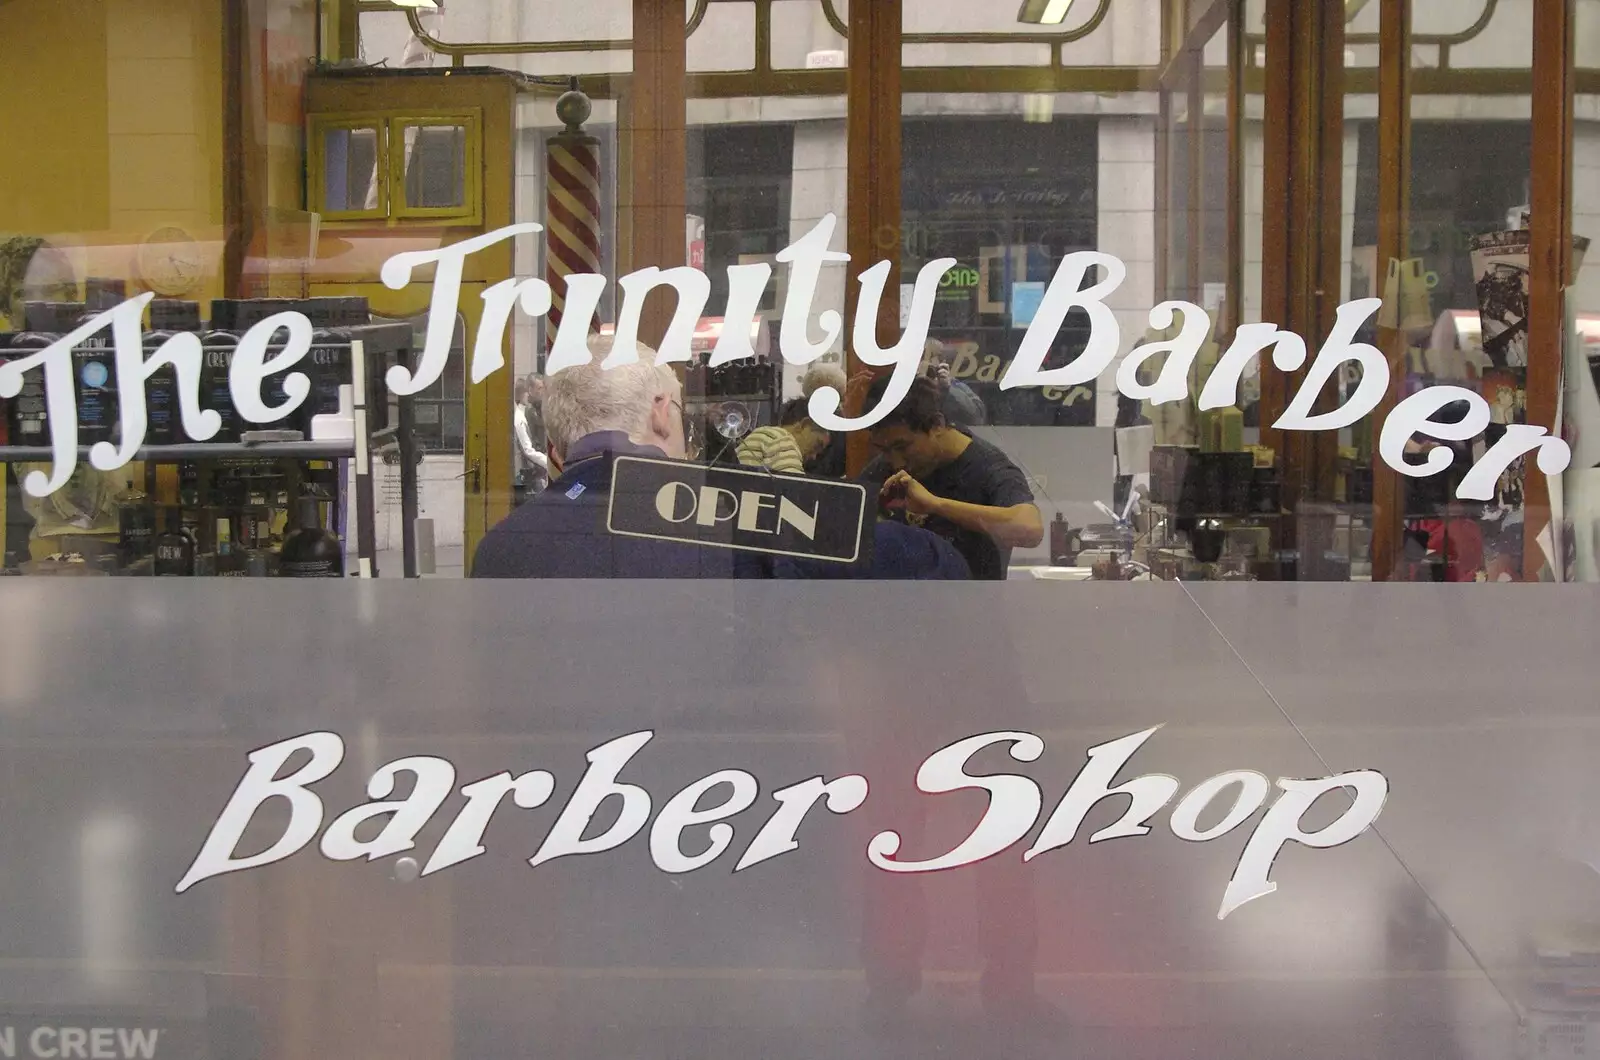 The Trinity Barber Shop, from Easter in Dublin, Ireland - 21st March 2008